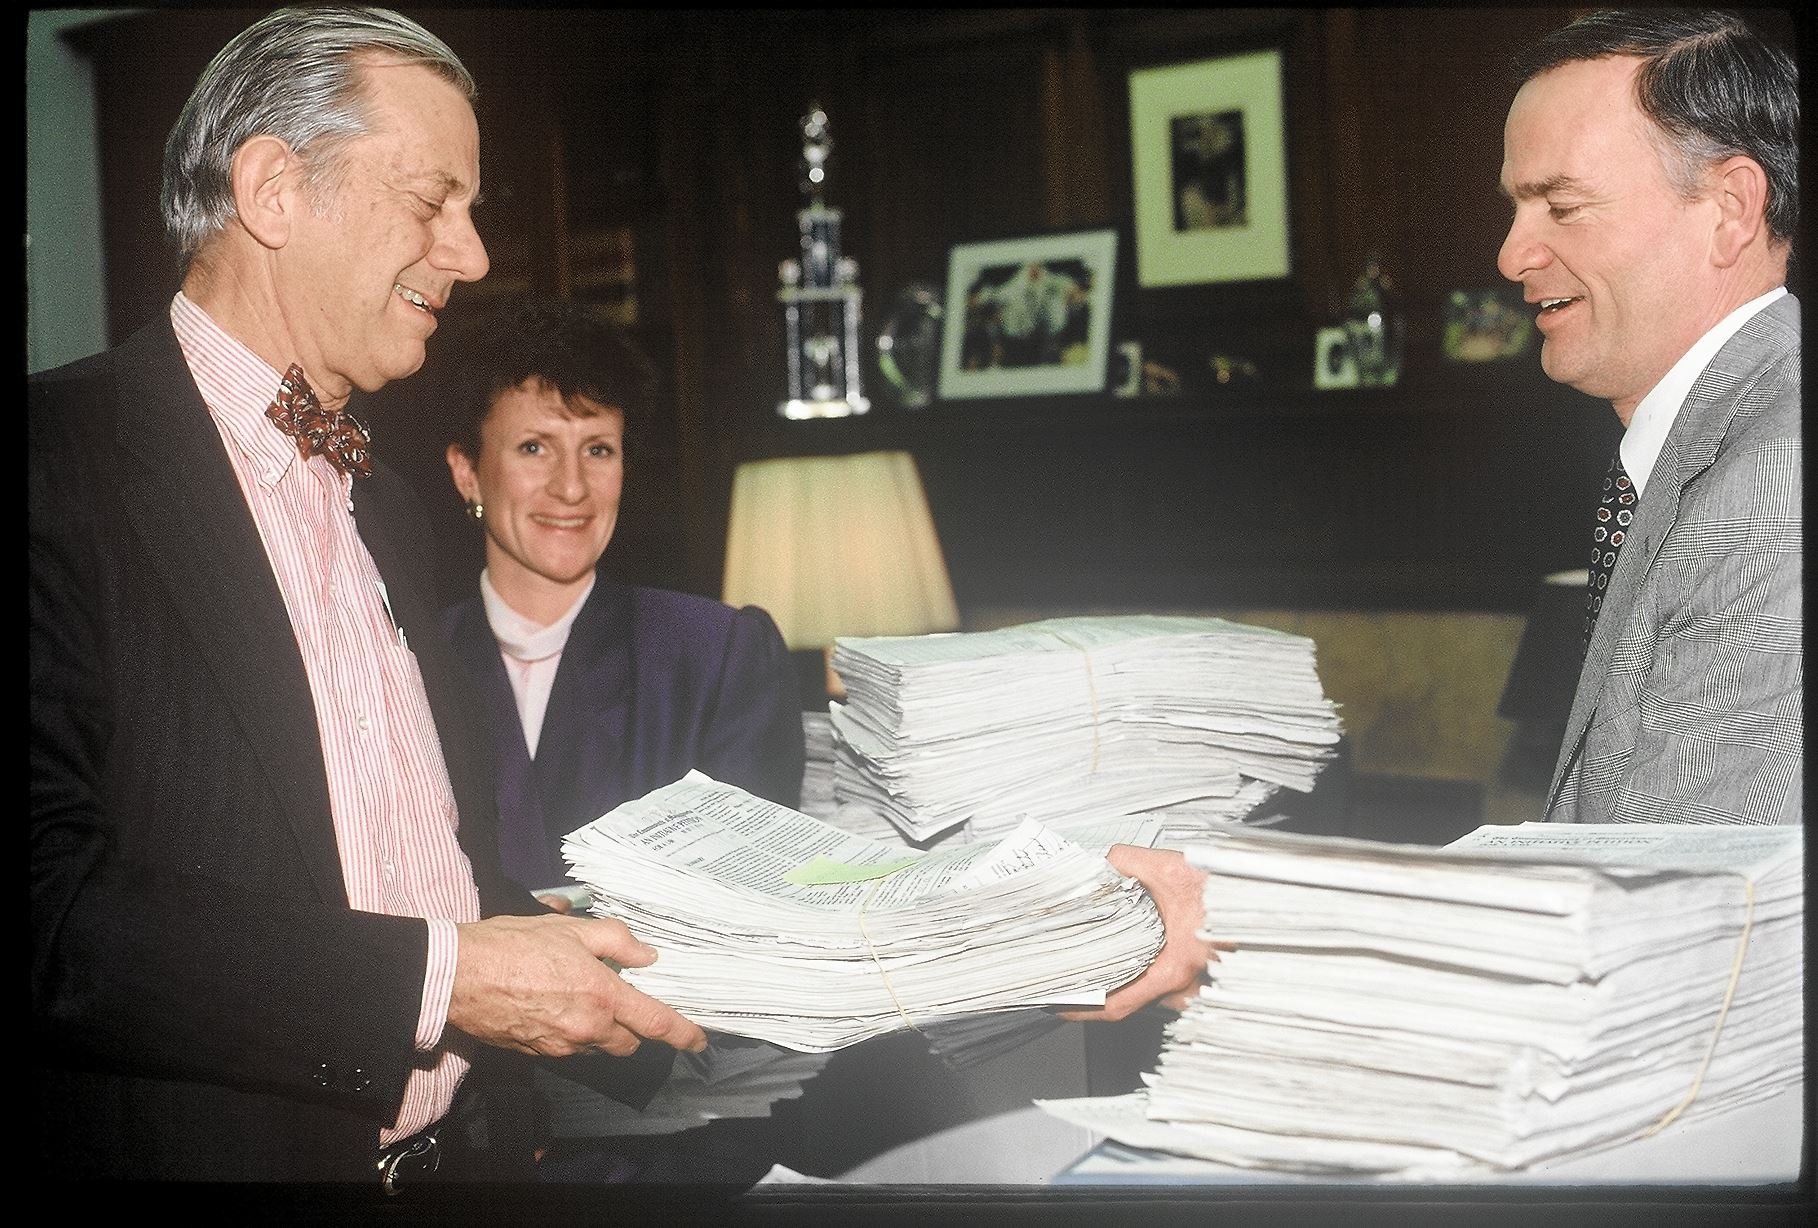 Dr. Blake Cady holds signature sheets for 1992's Question One ballot initiative. 